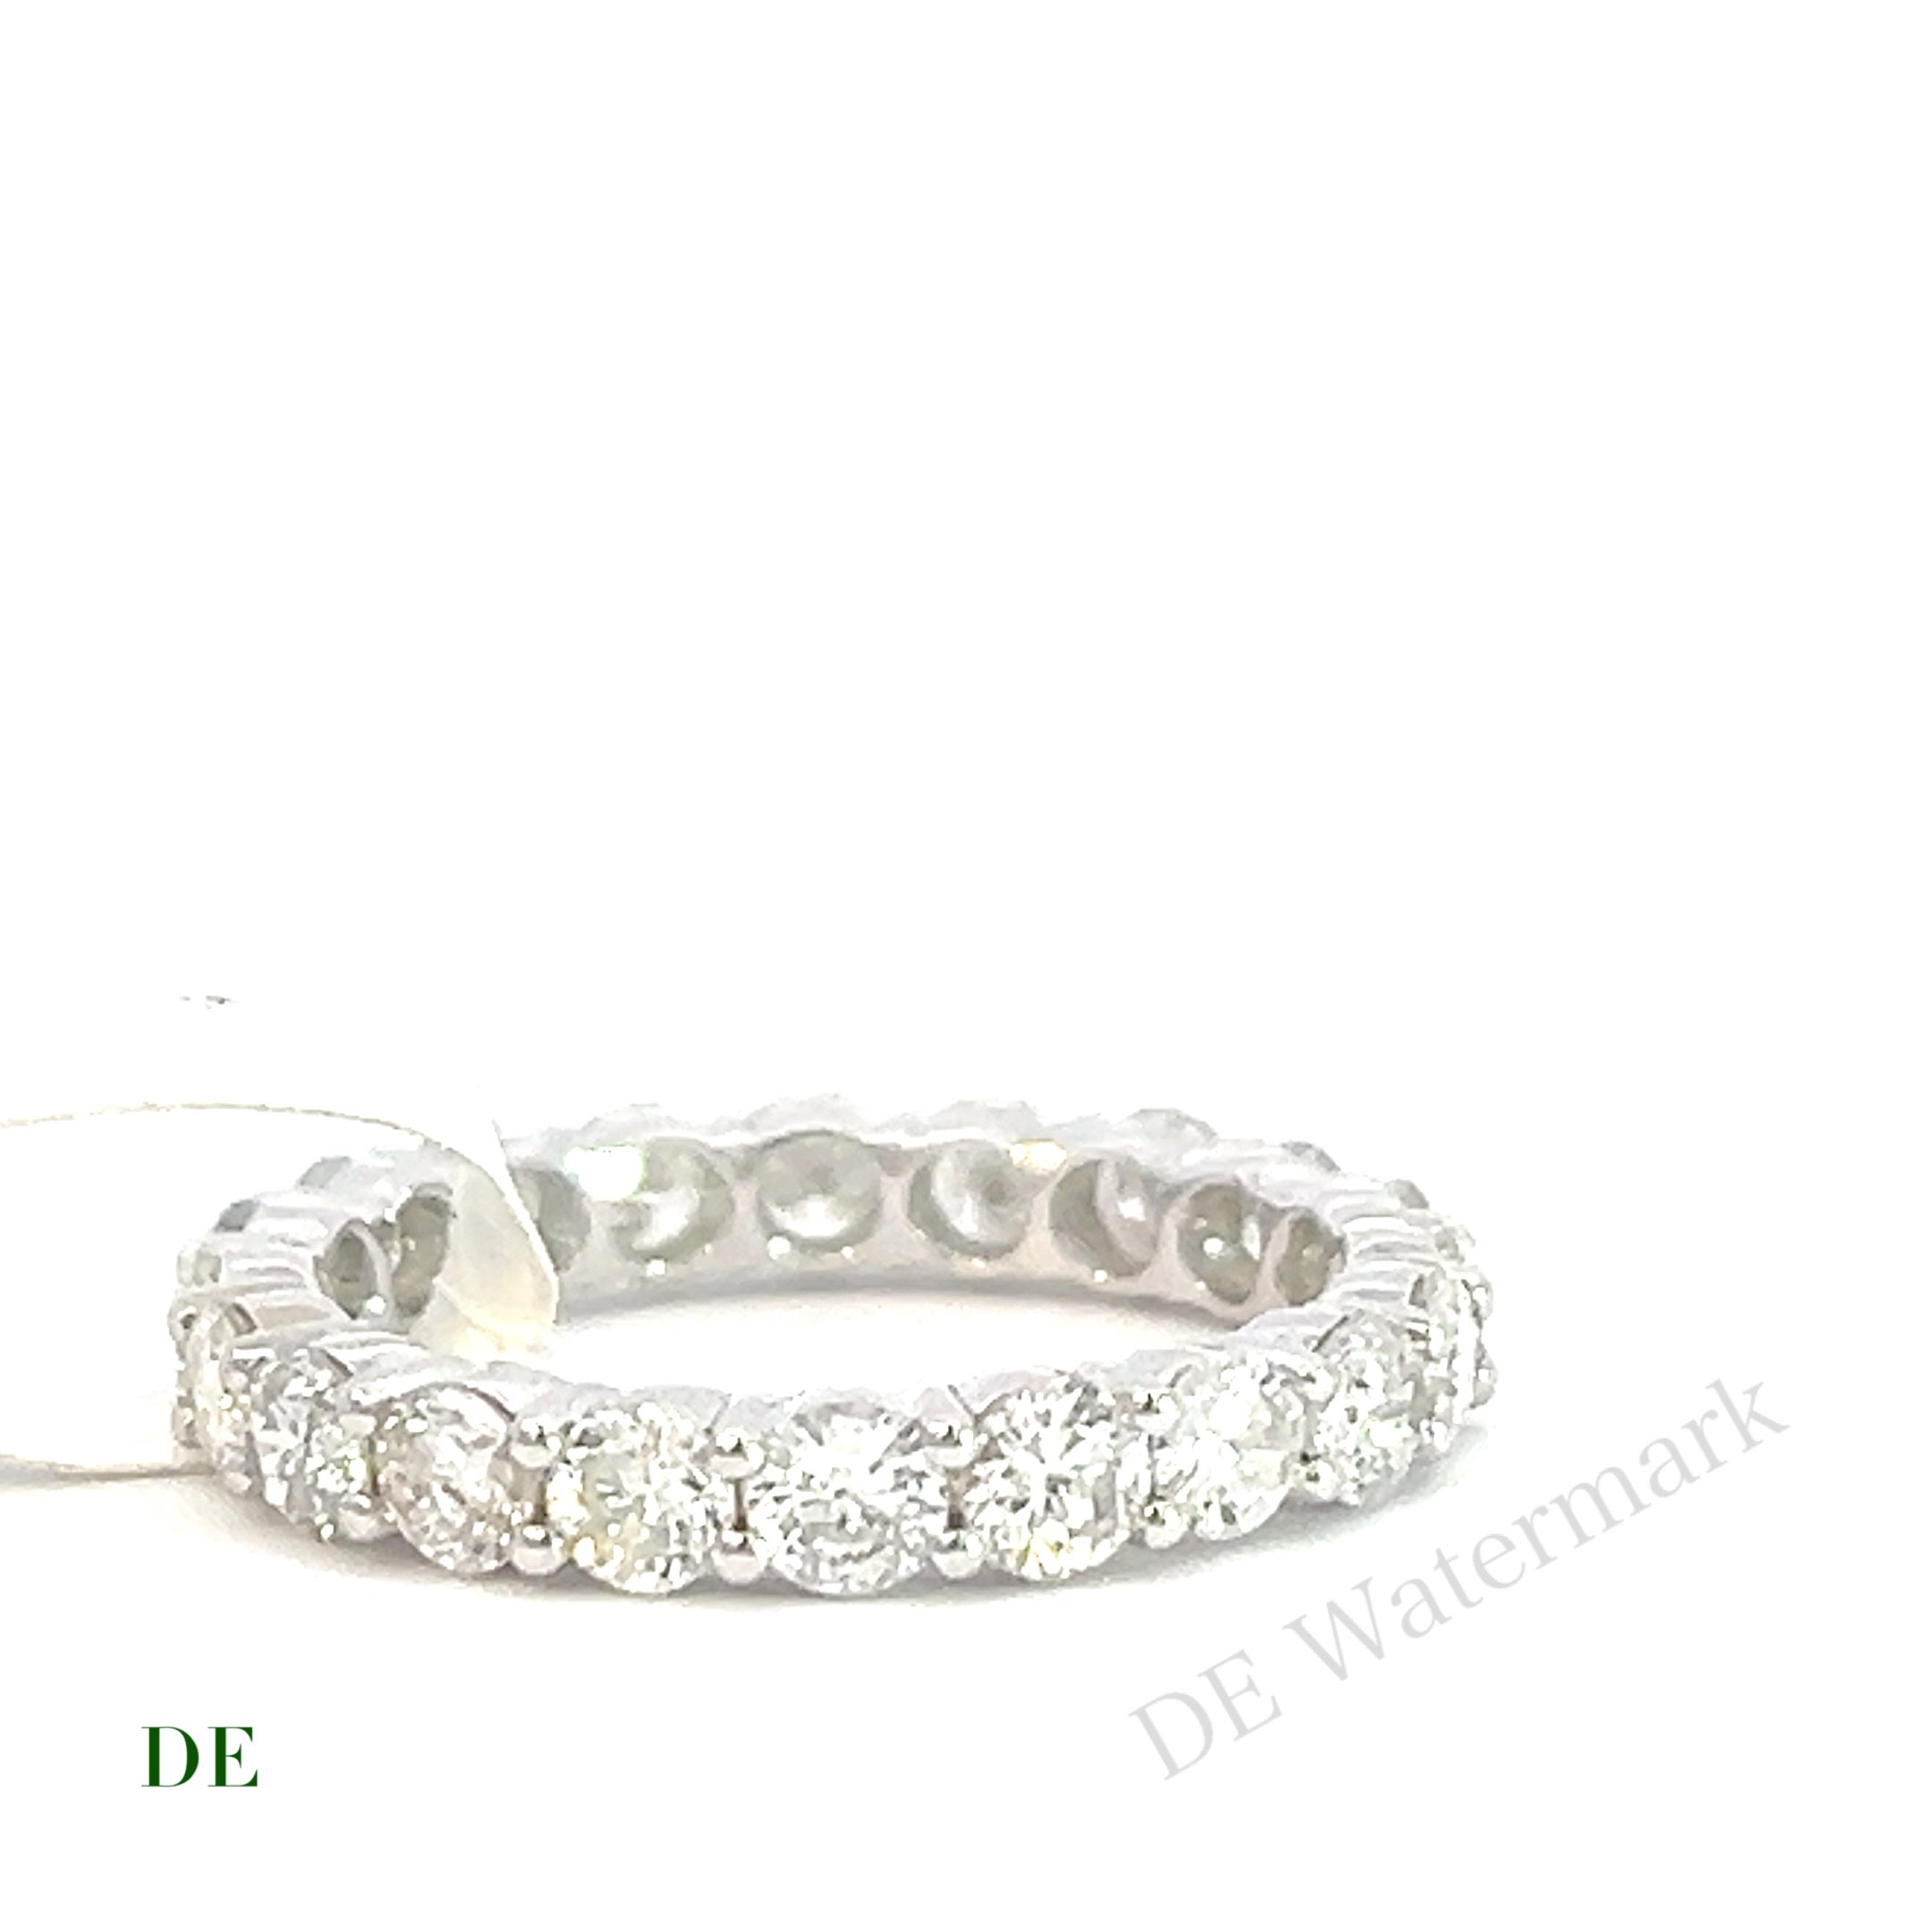 Classic 14k Gold 2.126 Carat Elegant Eternity Band Diamond Ring

Introducing the Classic 14k Gold 2.126 Carat Elegant Eternity Band Diamond Ring, a stunning symbol of timeless beauty and sophistication. This exceptional ring is designed to make a